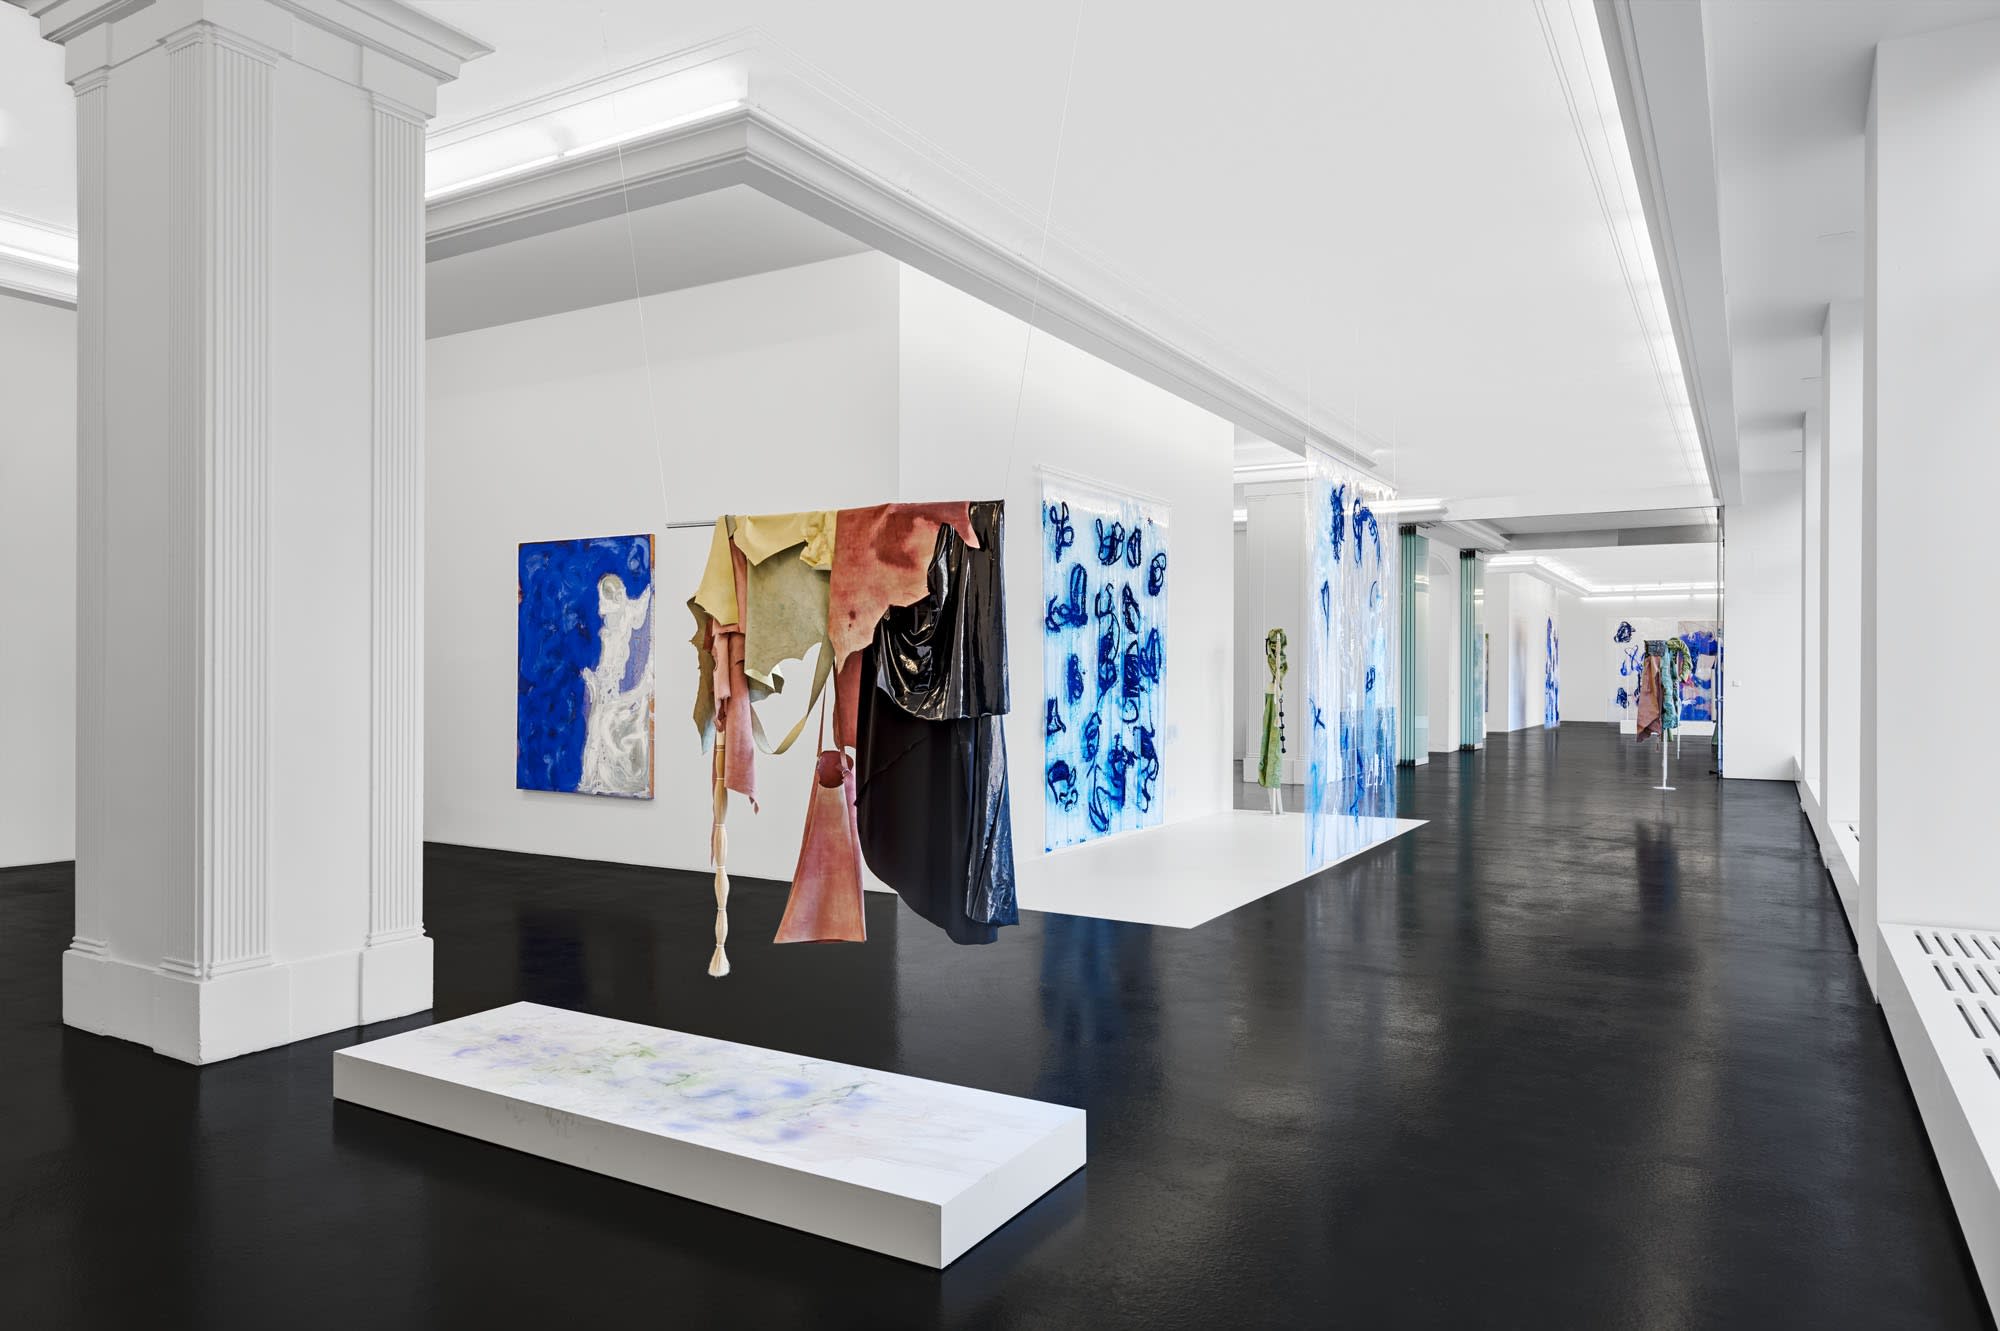 Donna Huanca Surrogate Painteen Installation View September 2 - October 28, 2016 Peres Projects, Berlin Photographed by: Adrian Parvulescu